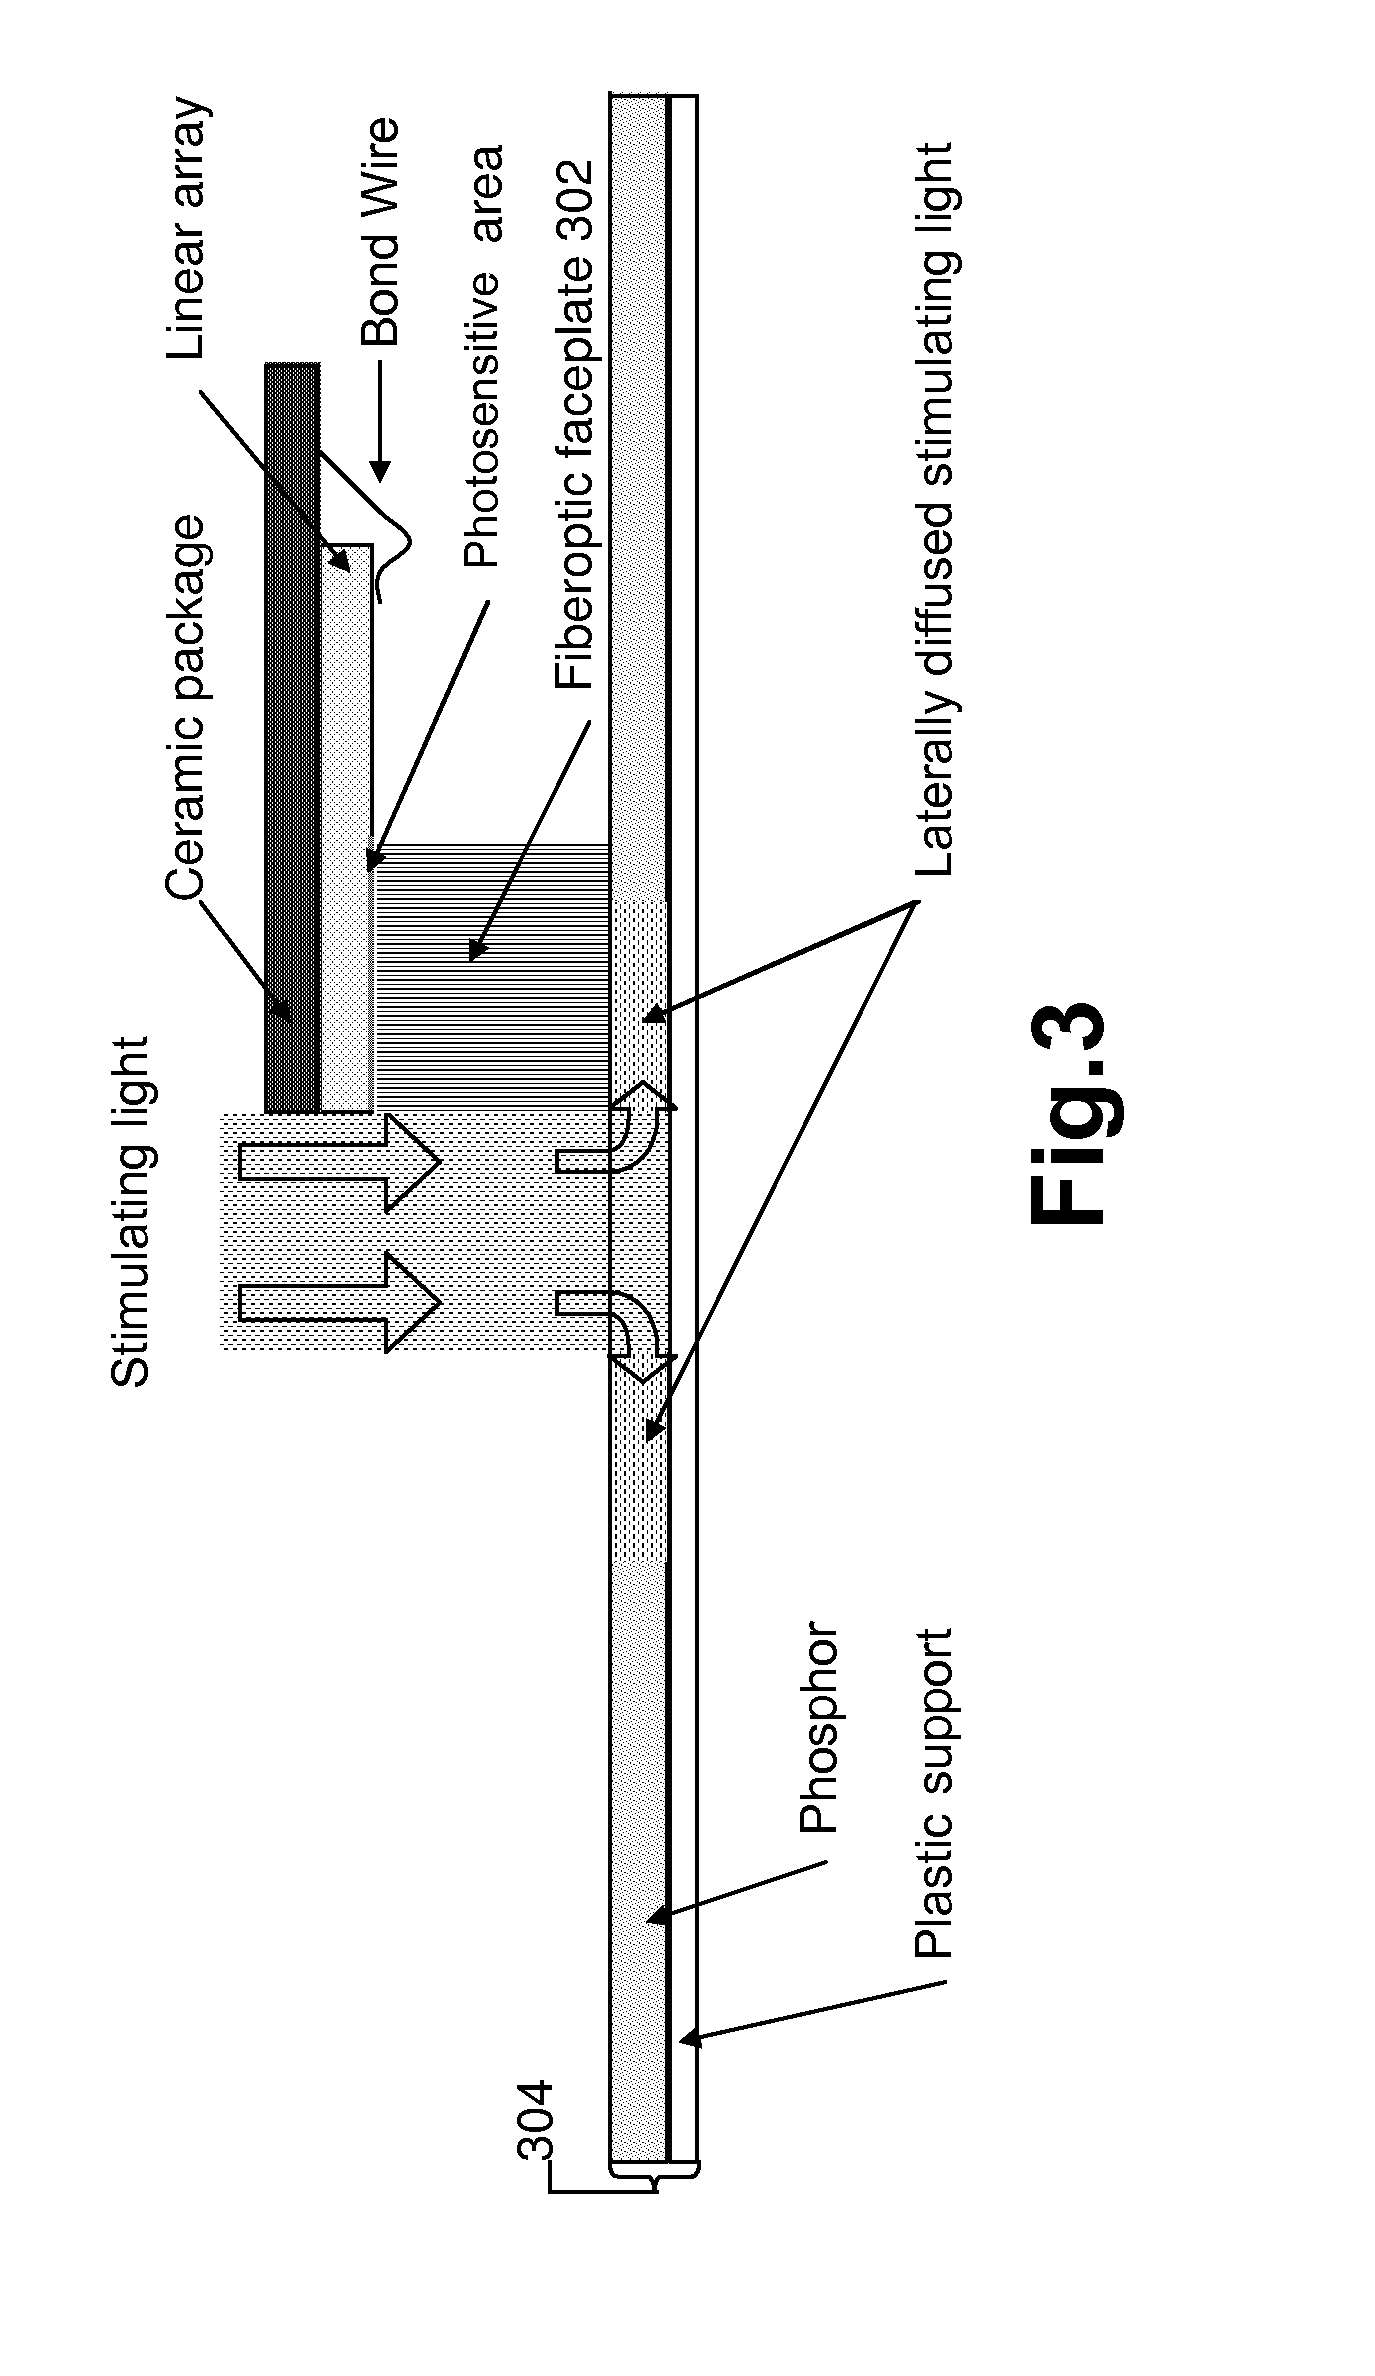 Light stimulating and collecting methods and apparatus for storage-phosphor image plates